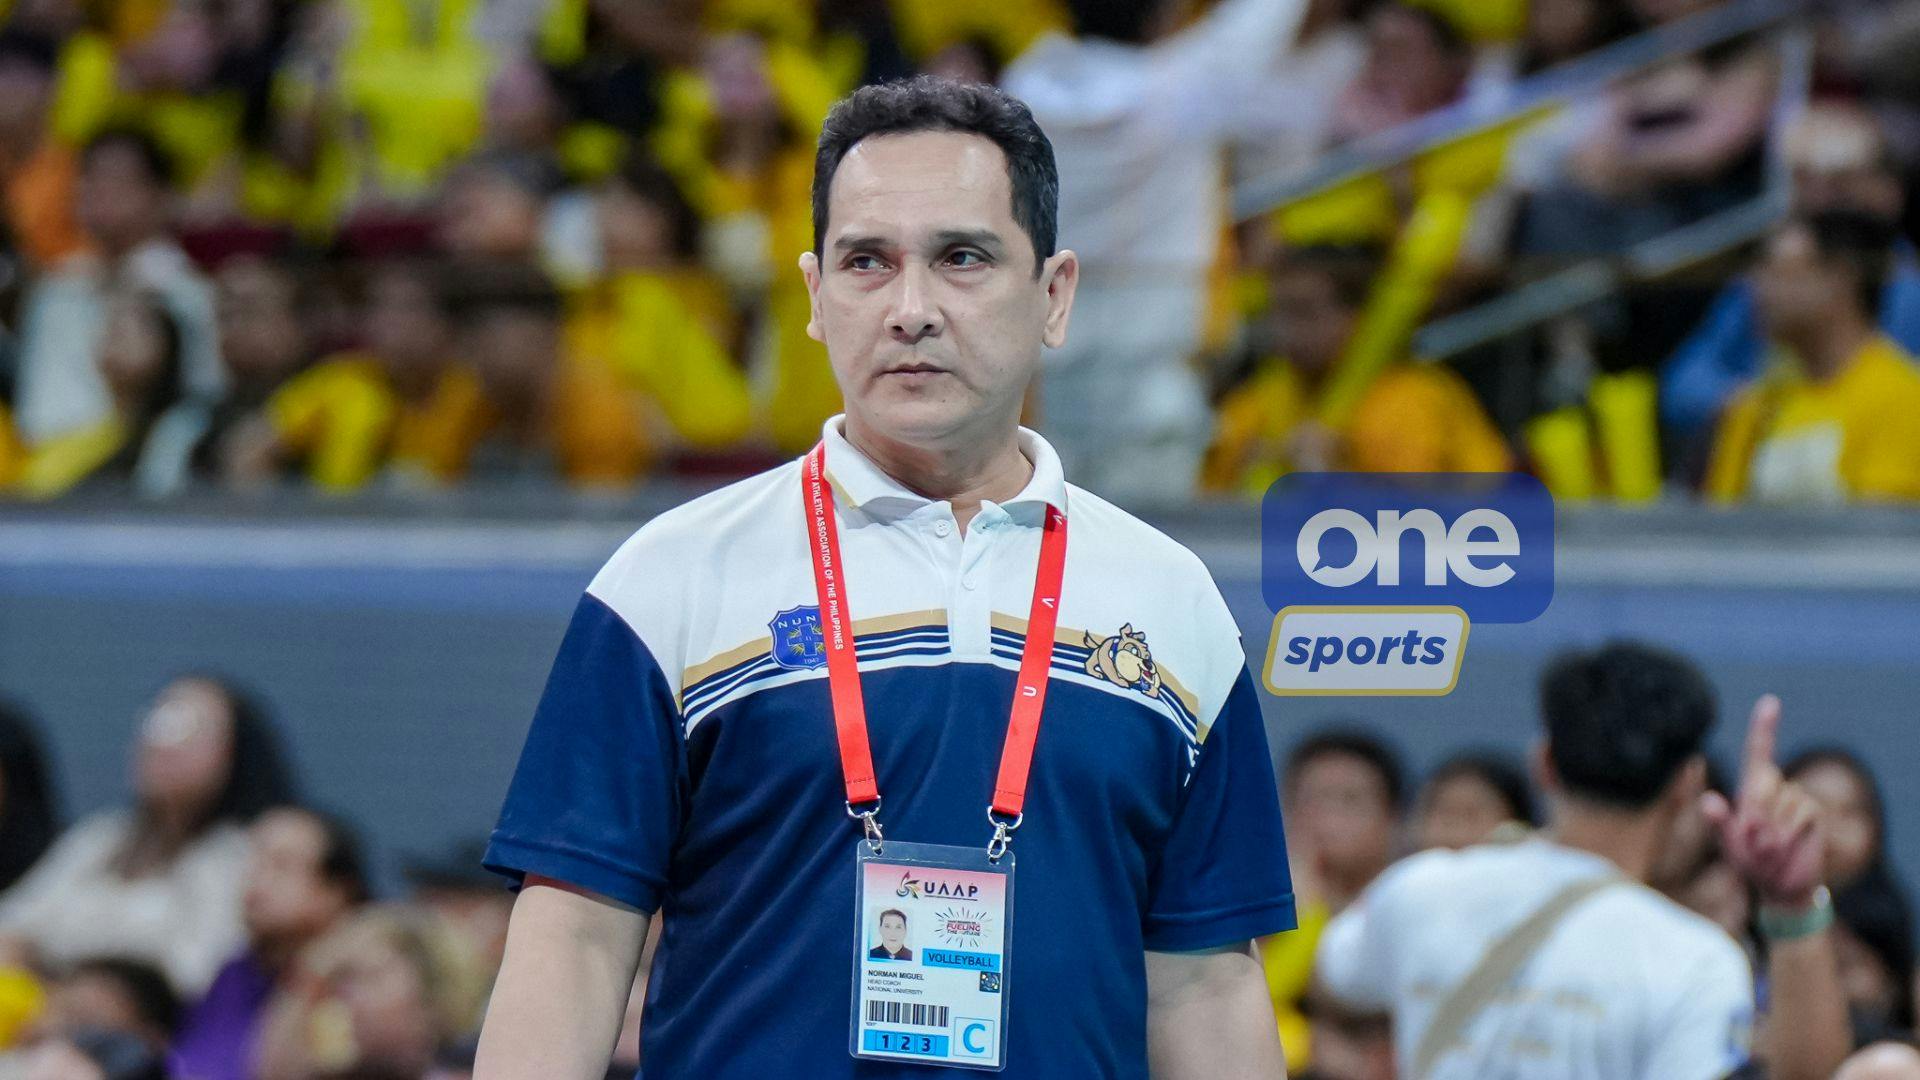 UAAP: Coach Norman Miguel thankful for UST stint after cementing legacy with NU